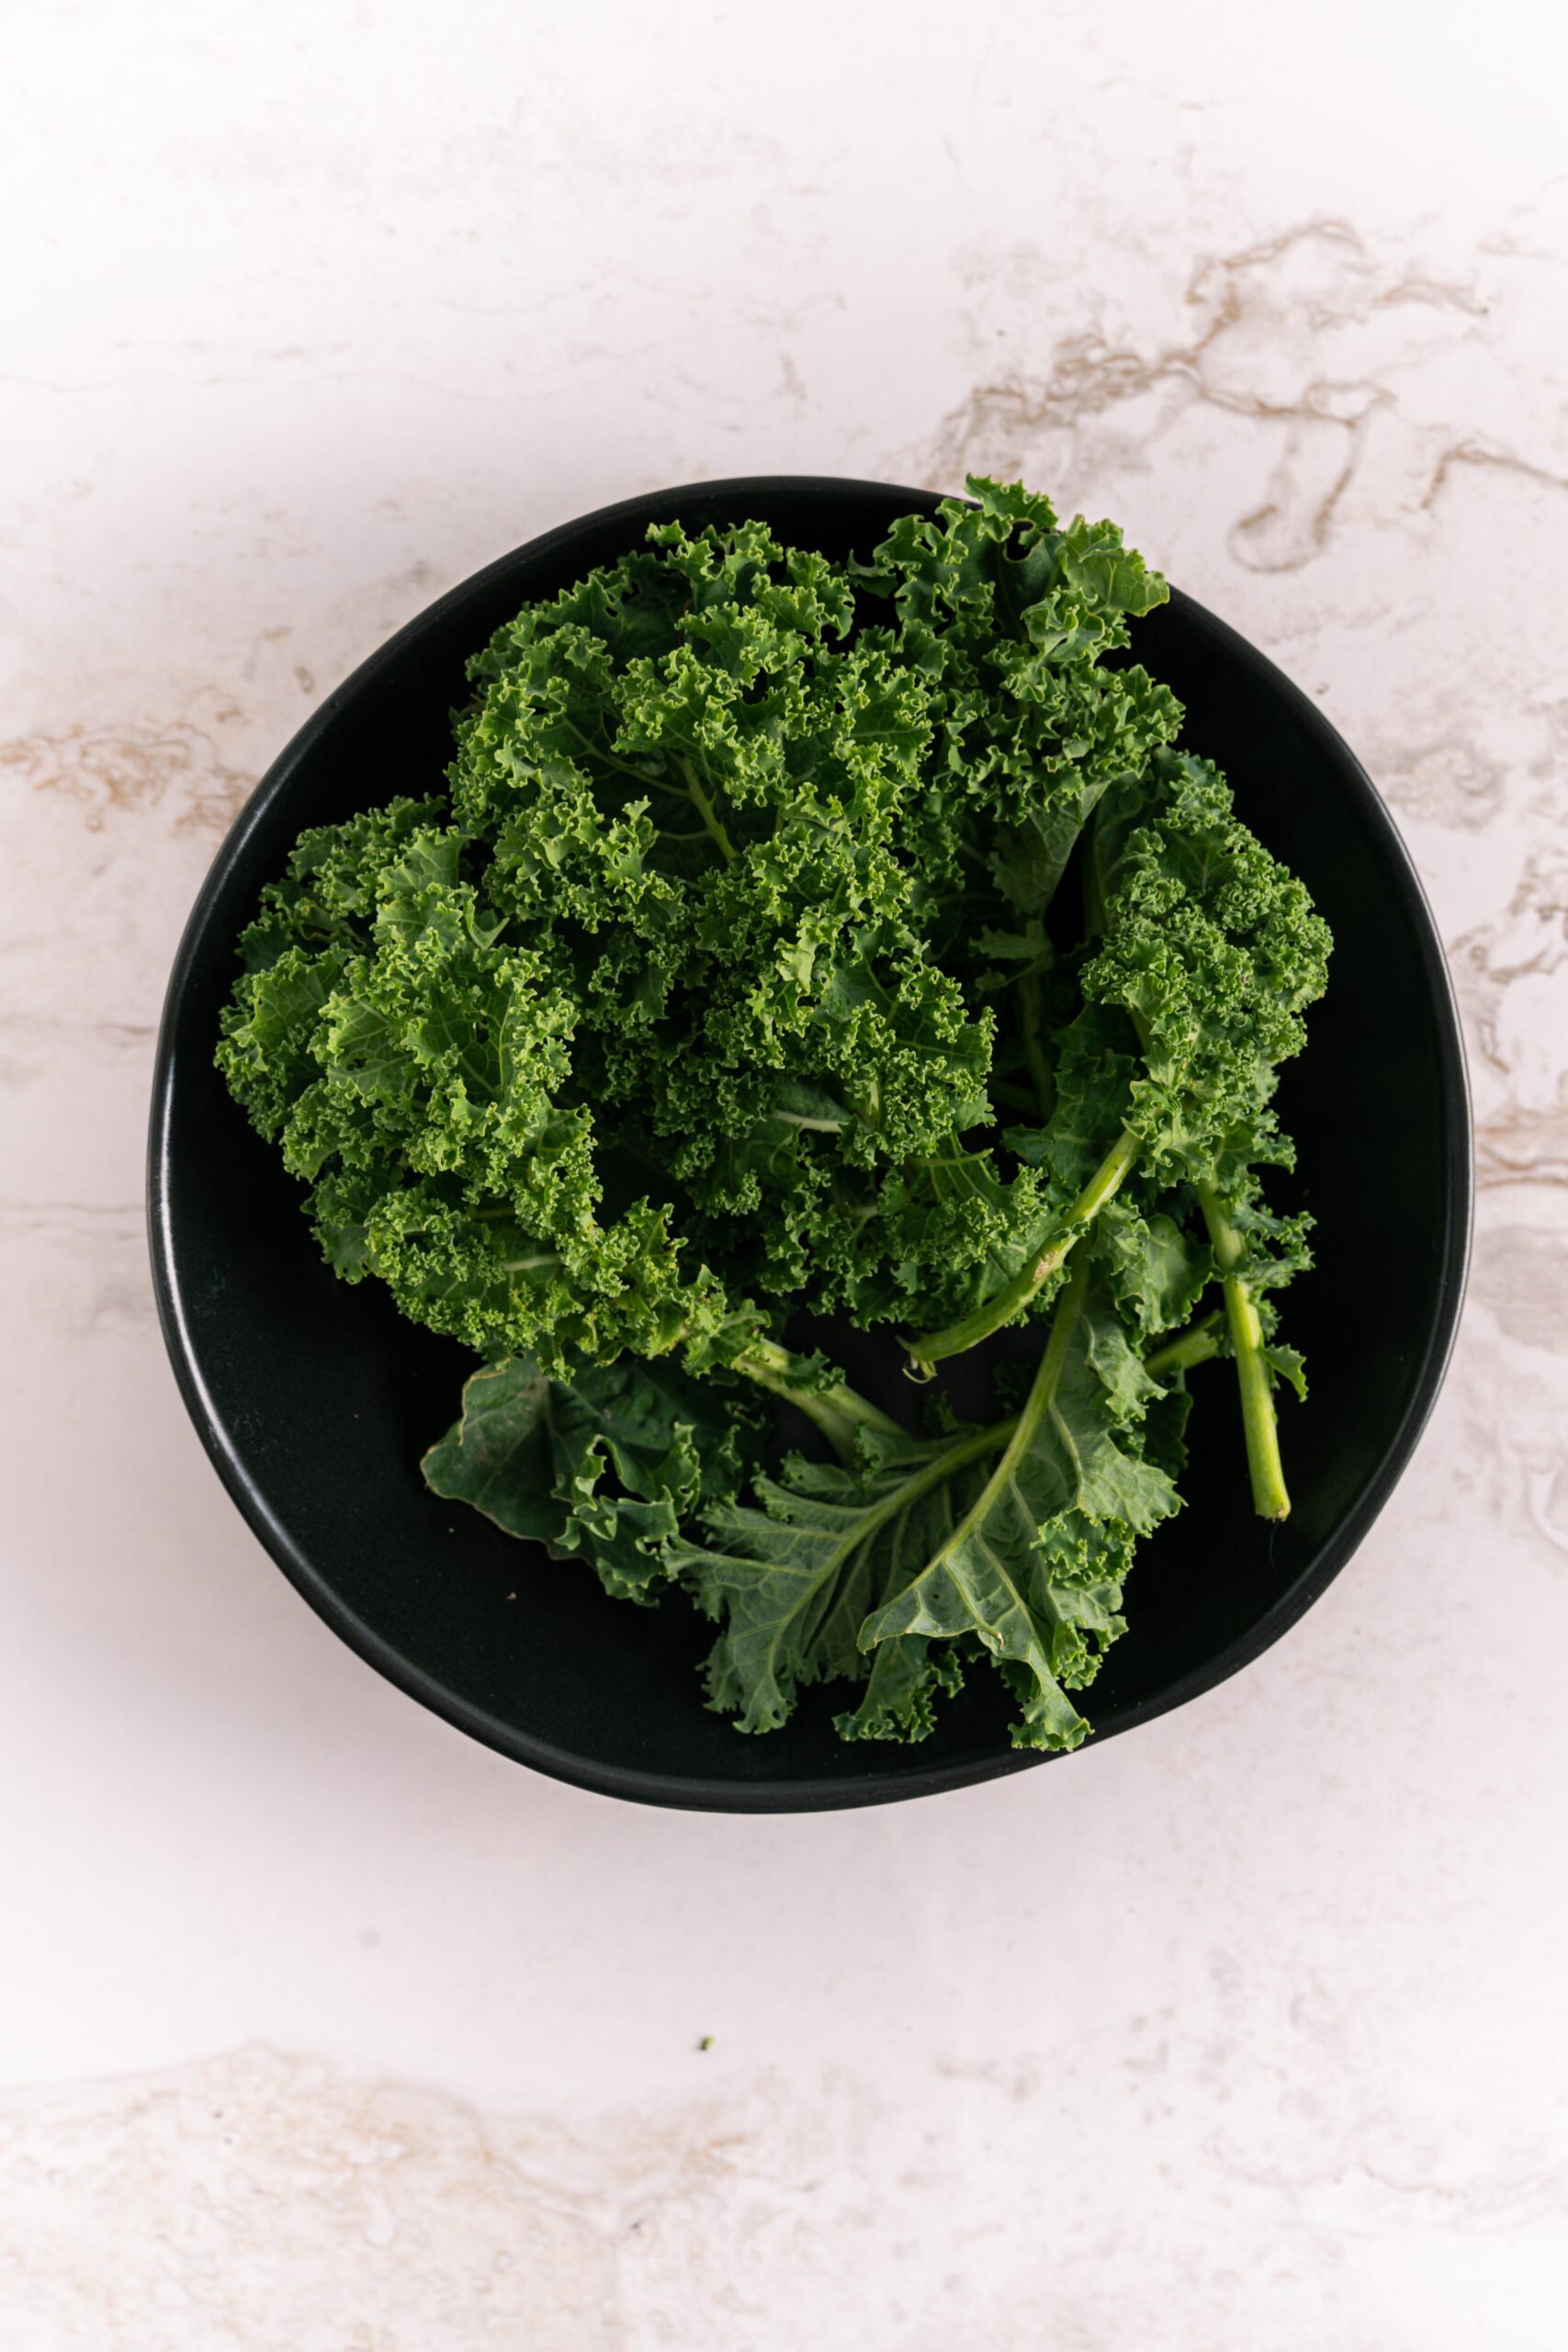 How Long Does Kale Last and How to Tell If It's Gone Bad - MAY